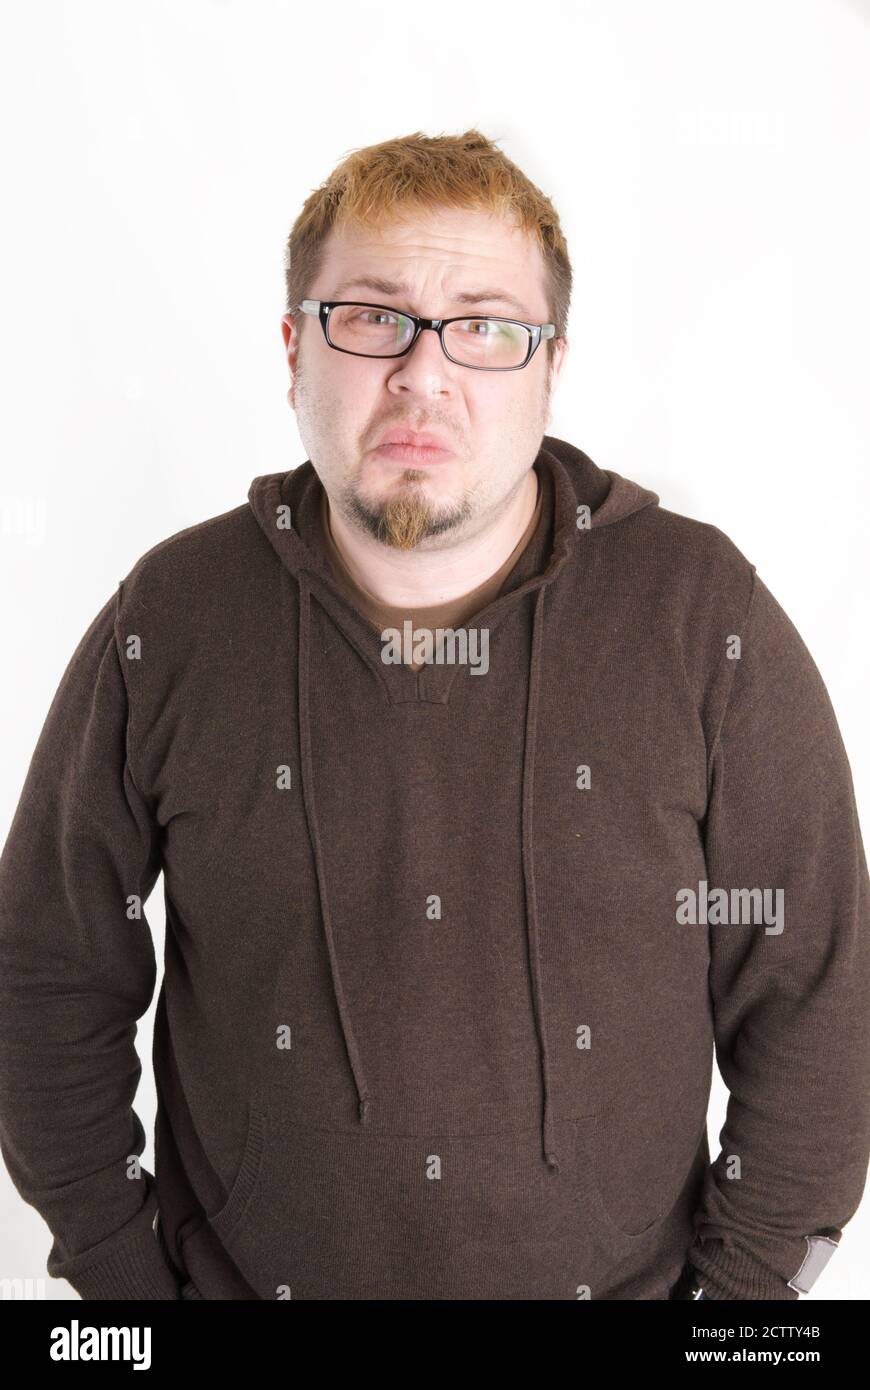 Man with glasses and brown sweatshirt Stock Photo